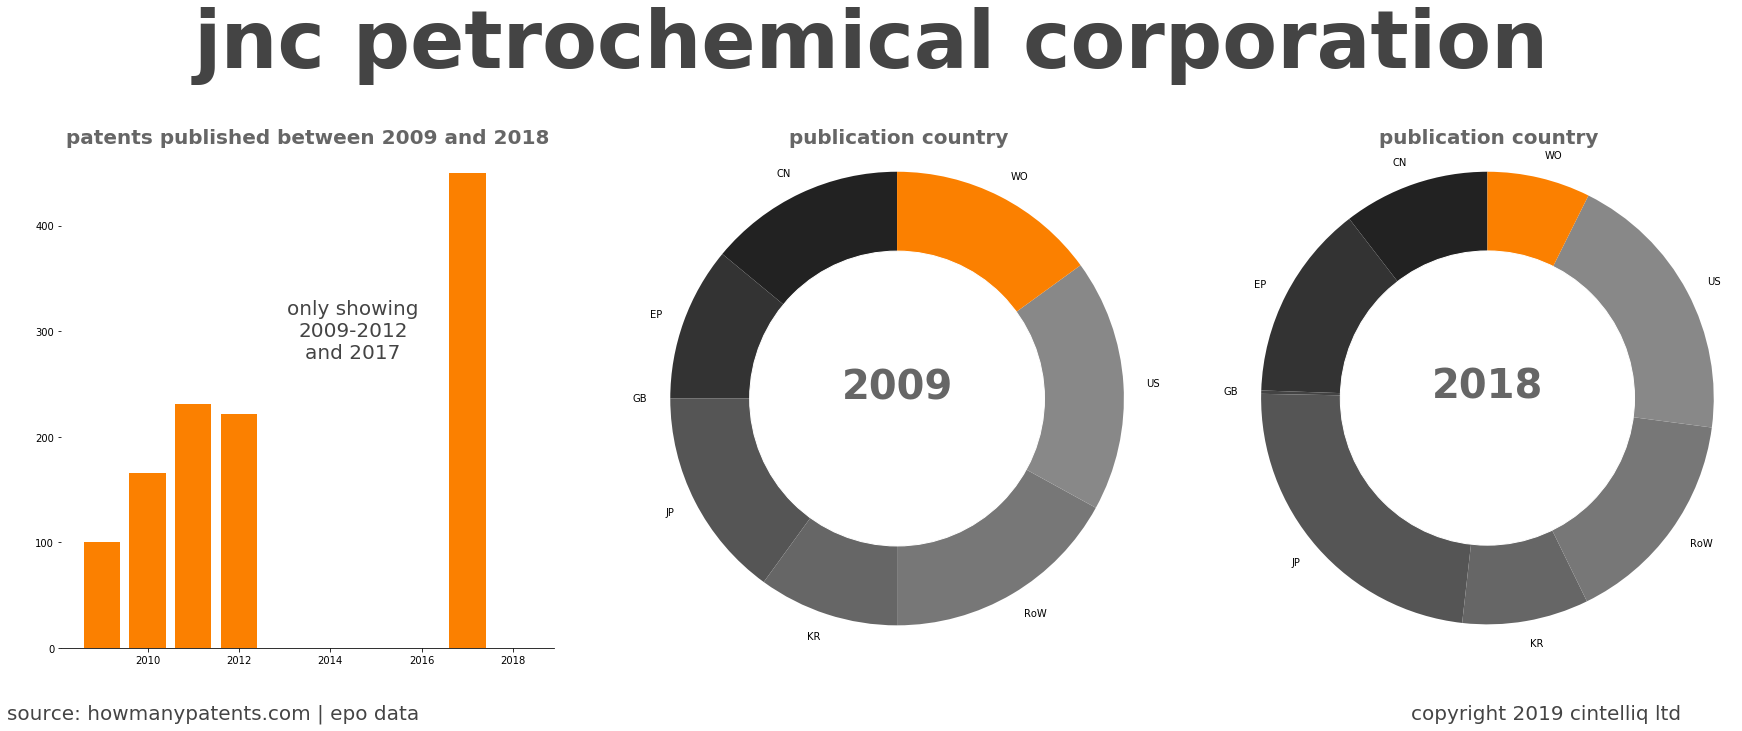 summary of patents for Jnc Petrochemical Corporation